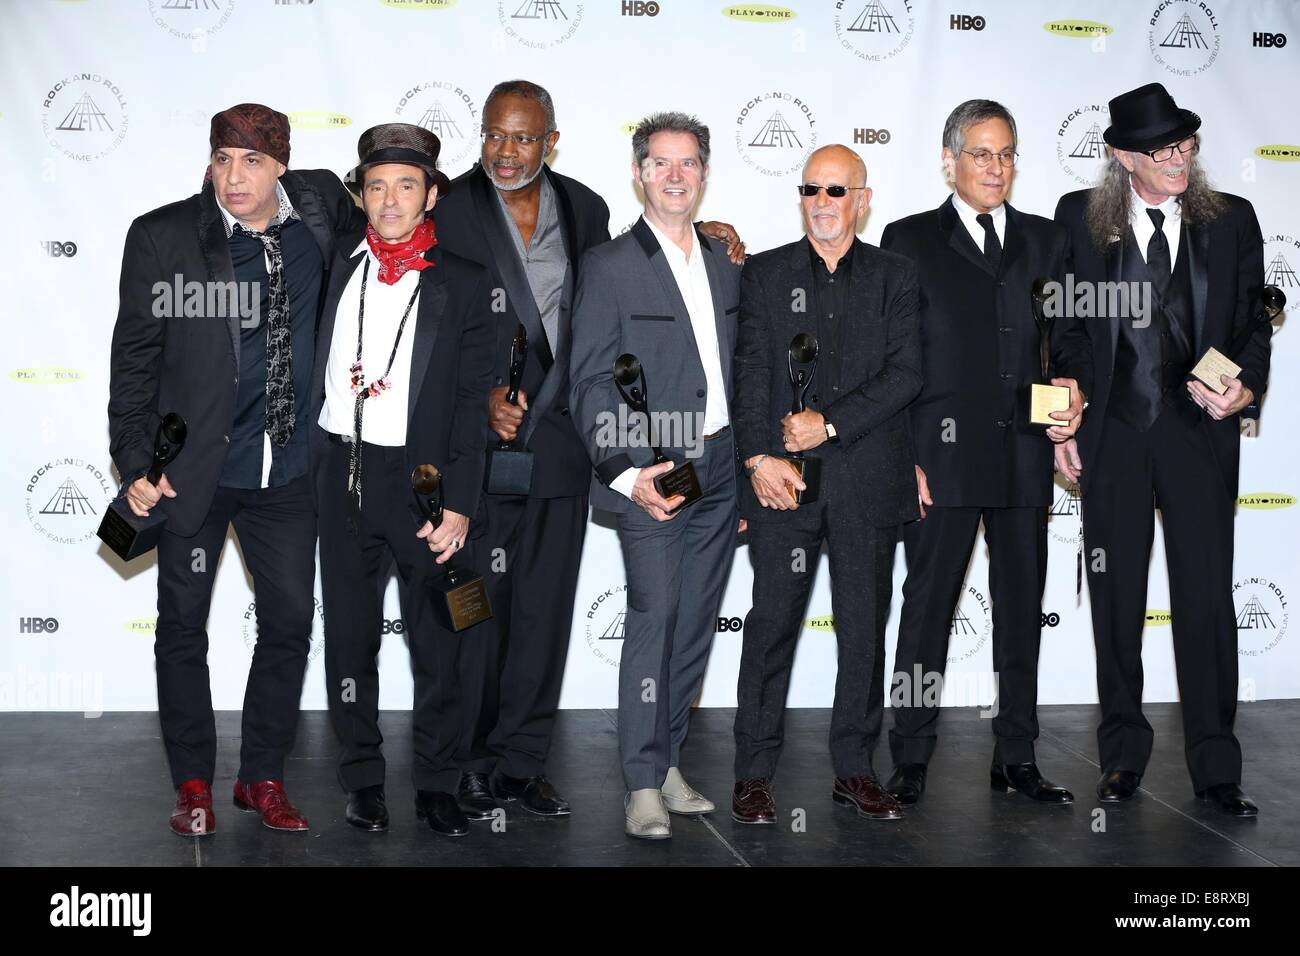 the 29th Annual Rock And Roll Hall Of Fame Induction Ceremony at Barclays Center of Brooklyn on April 10, 2014 in New York City.  Featuring: Steven Van Zandt,Nils Lofgren,David Sancious,Garry Tallent,Roy Bittan,Max Weinberg and Vini Lopez Where: New York, New York, United States When: 11 Apr 2014 Stock Photo